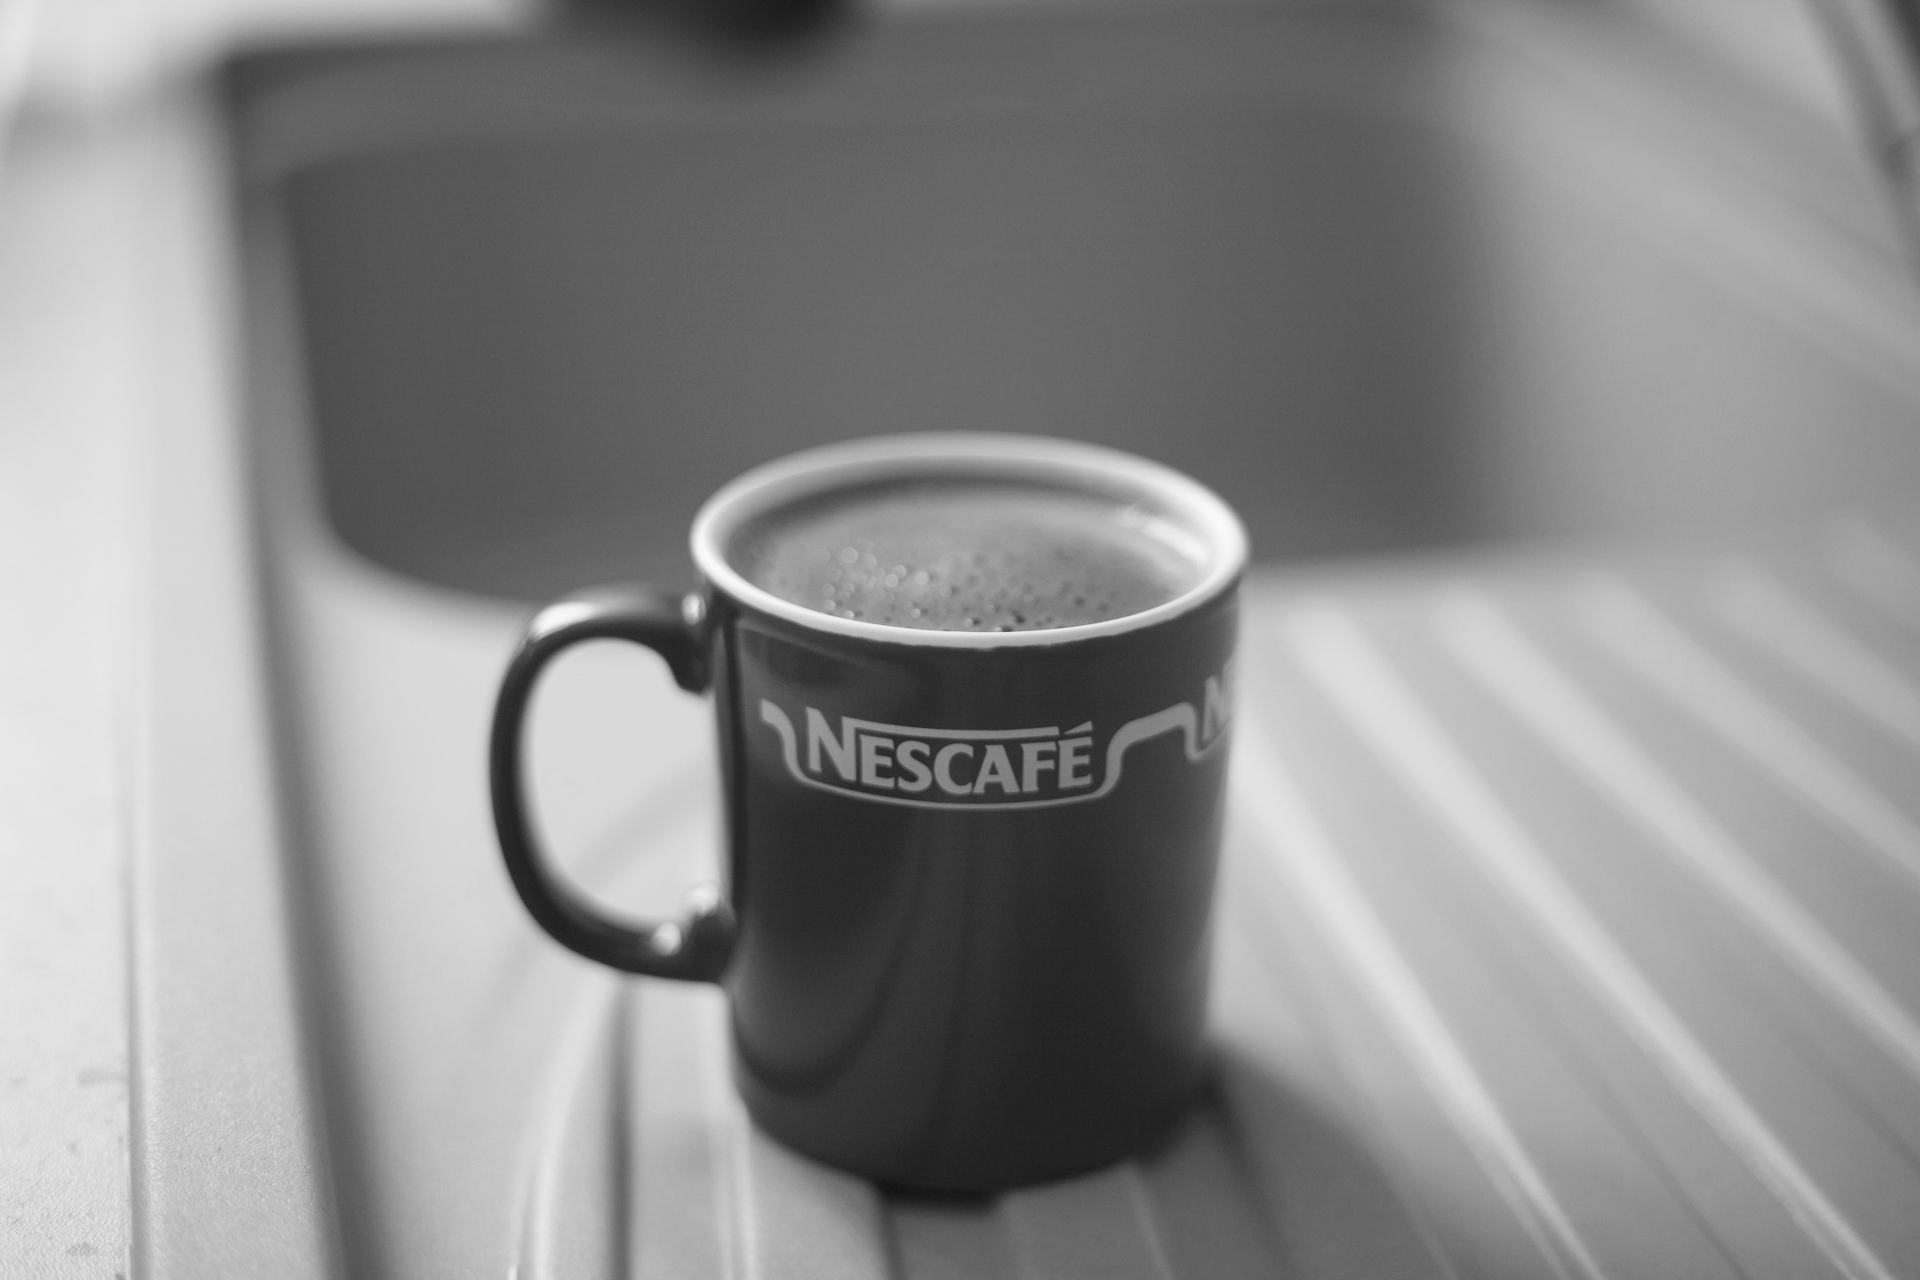 A cup of Nescafe coffee sits beside a sink